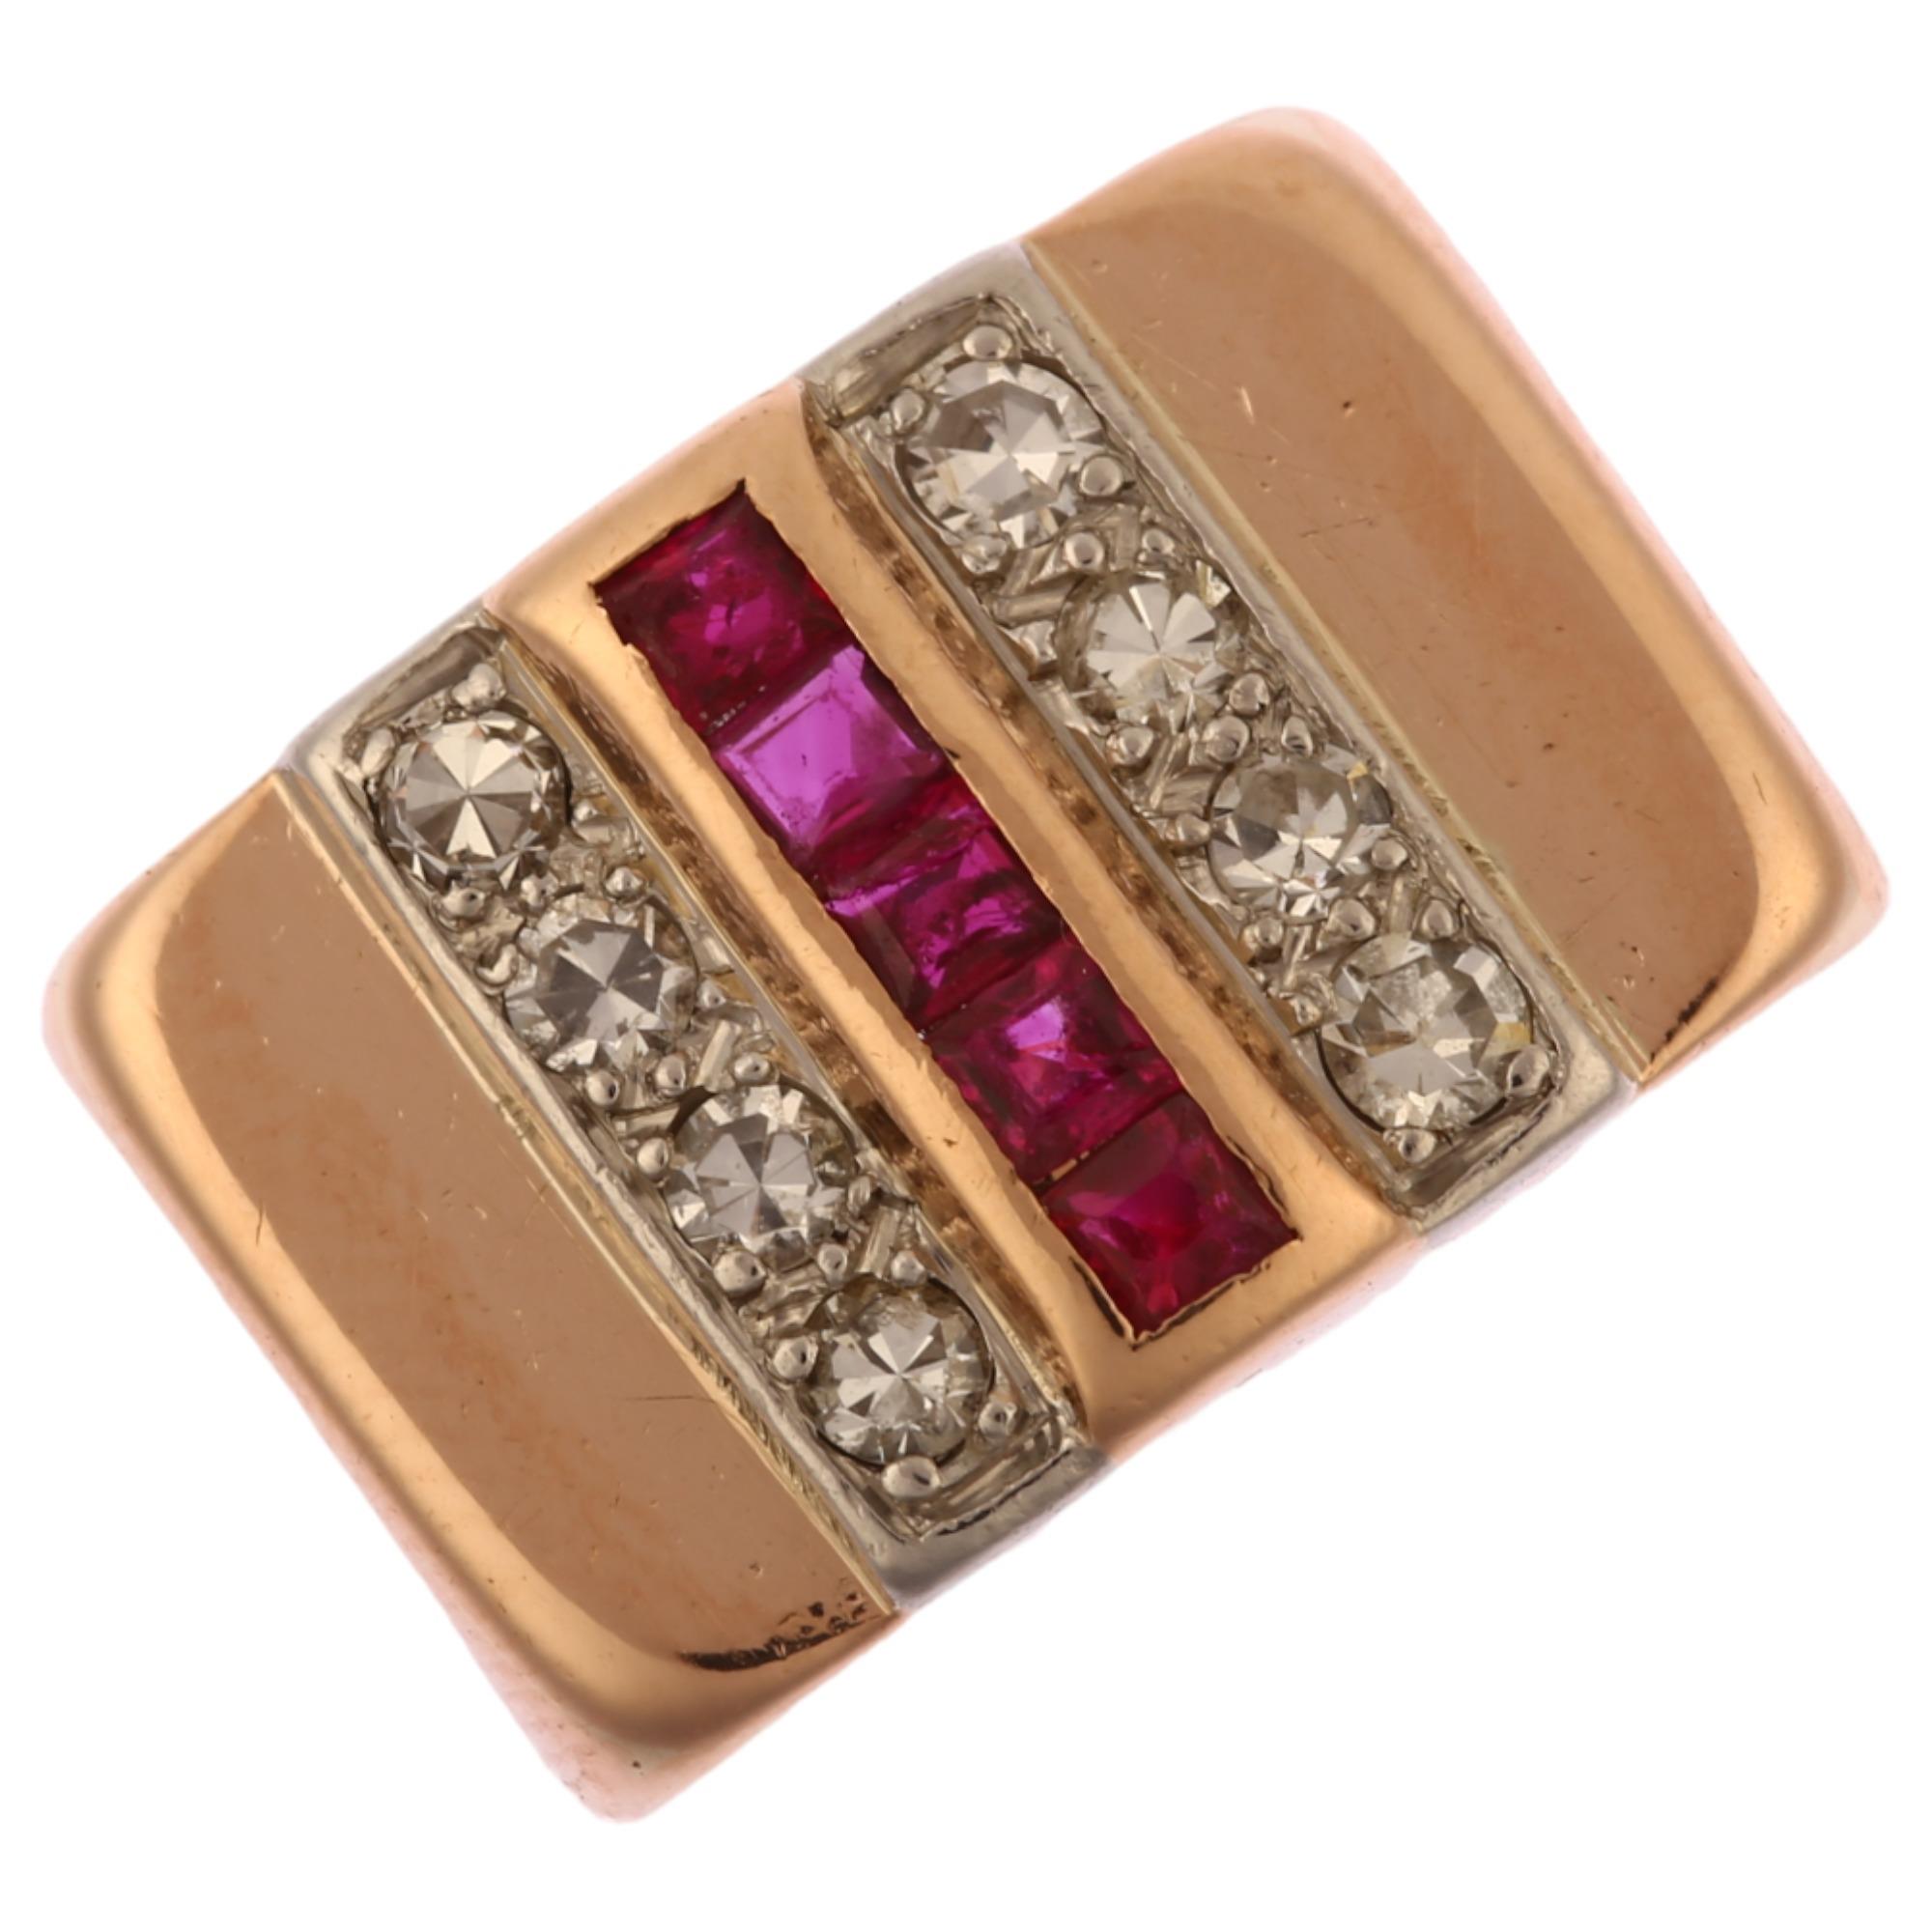 A mid-20th century ruby and diamond signet ring, unmarked 14ct rose gold odenesque settings with